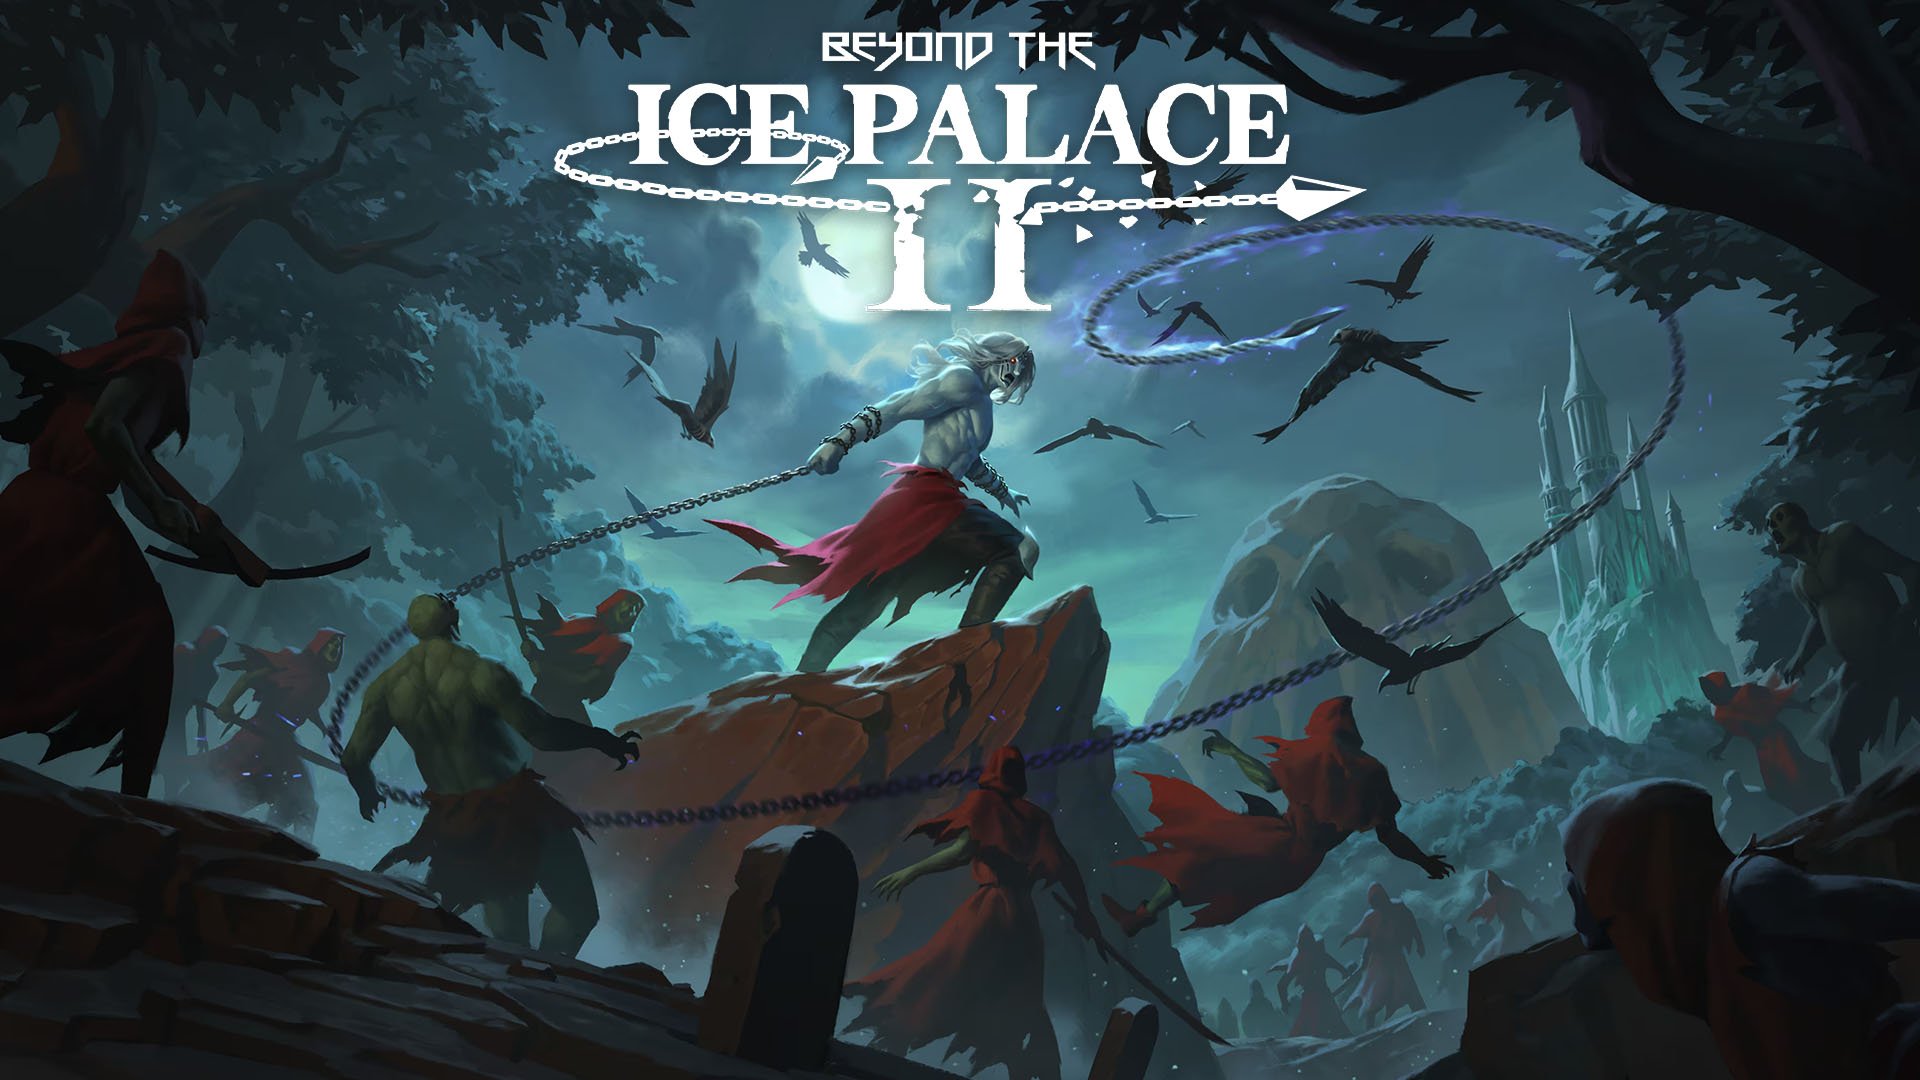 #
      Classic action platformer revival Beyond the Ice Palace II announced for PS5, Xbox Series, PS4, Xbox One, Switch, and PC